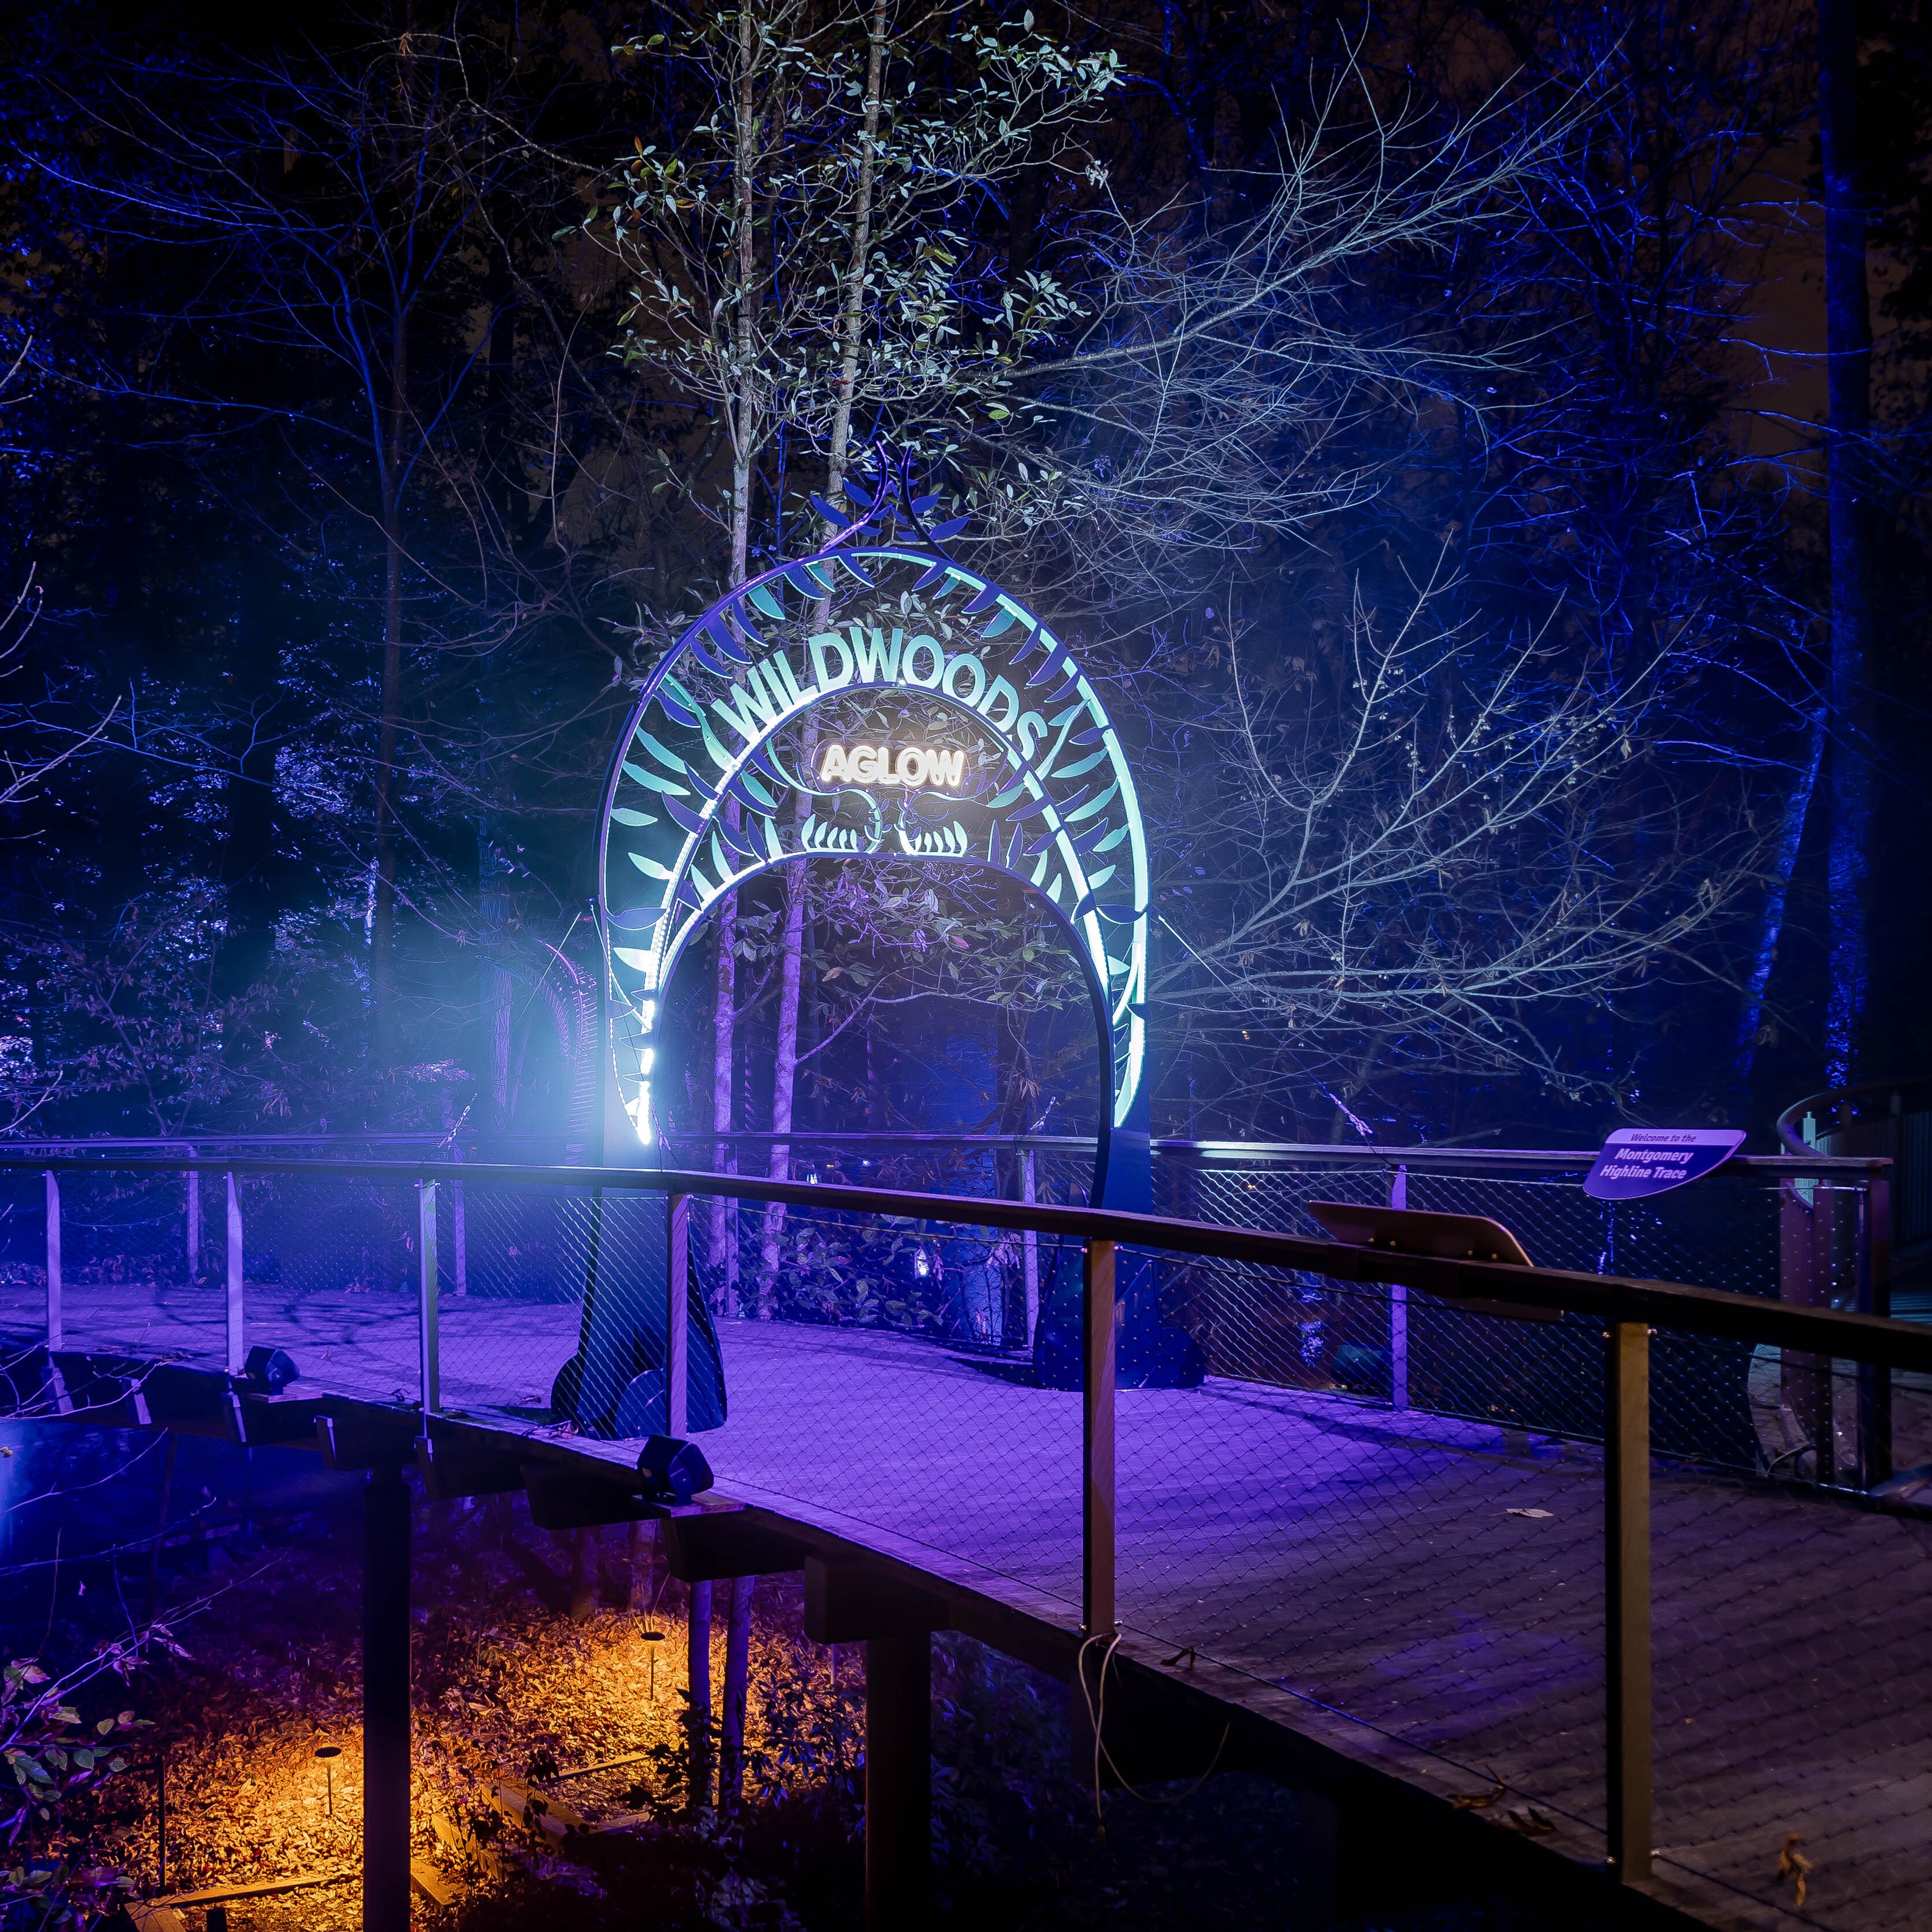 Raised walkway with glowing arch. The arch says "WILDWOODS AGLOW" and is decorated with leaves.